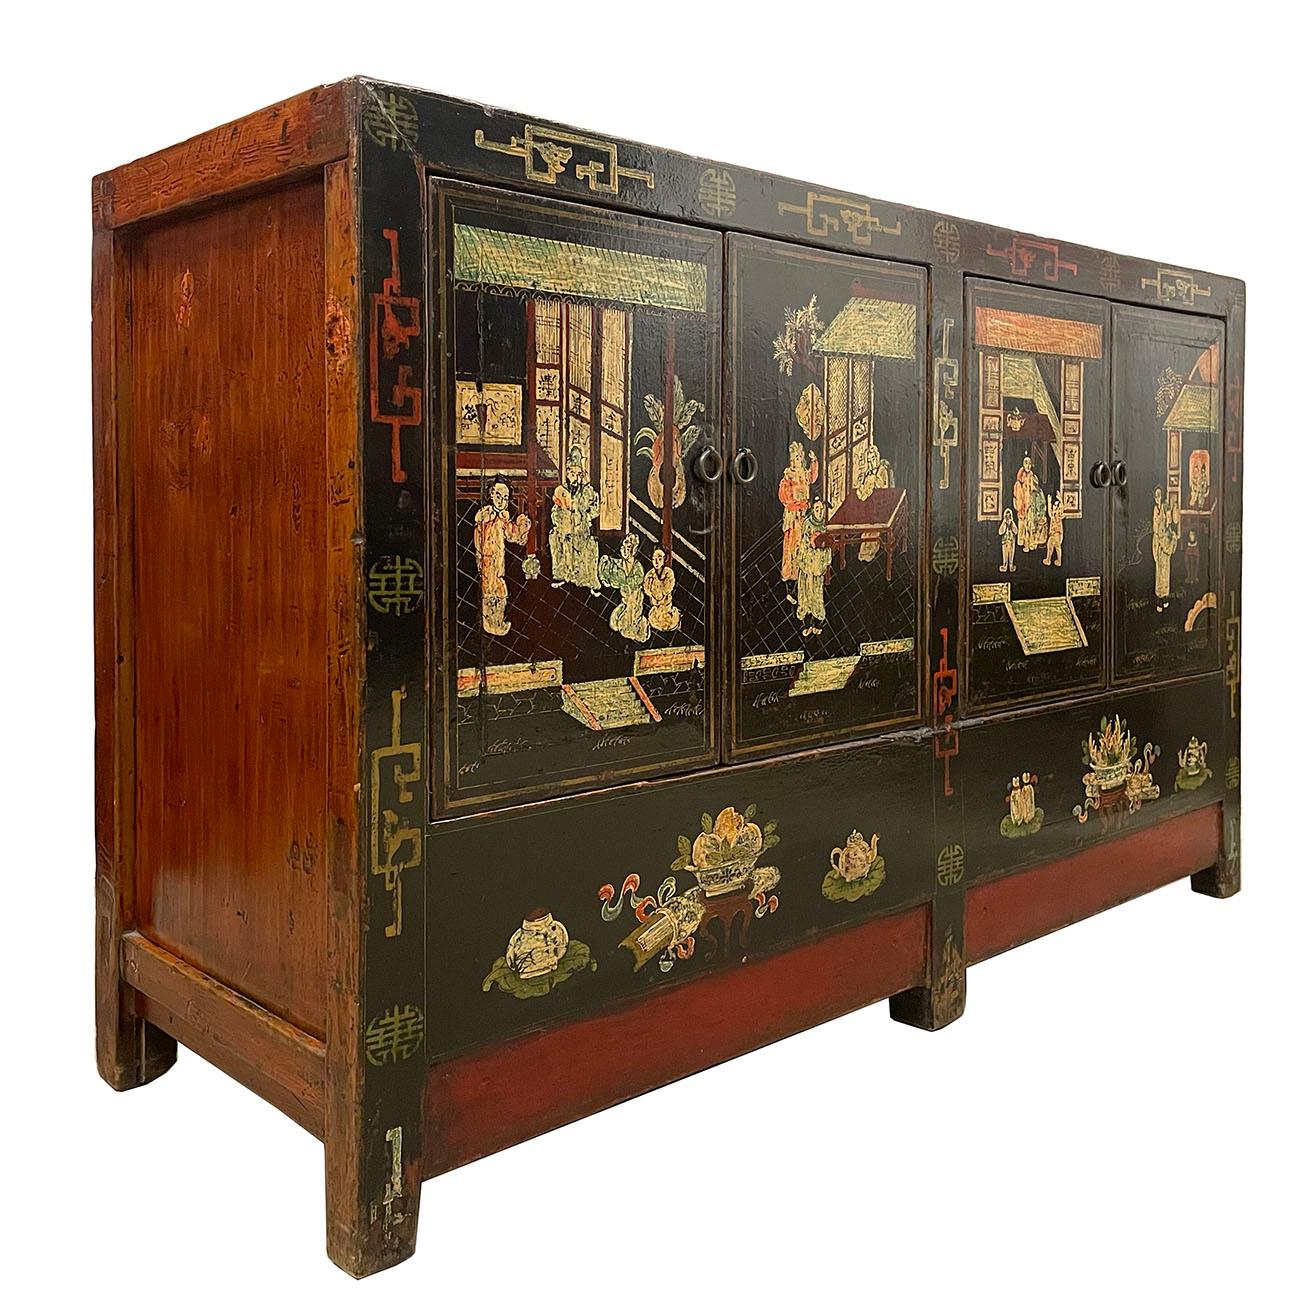 This Chinese antique color painted shan xi twin cabinet has about 130 years history. You can easily identify that on the pictures. This cabinet has beautiful color painting of traditional Chinese folk art design on black lacquer finished front. It